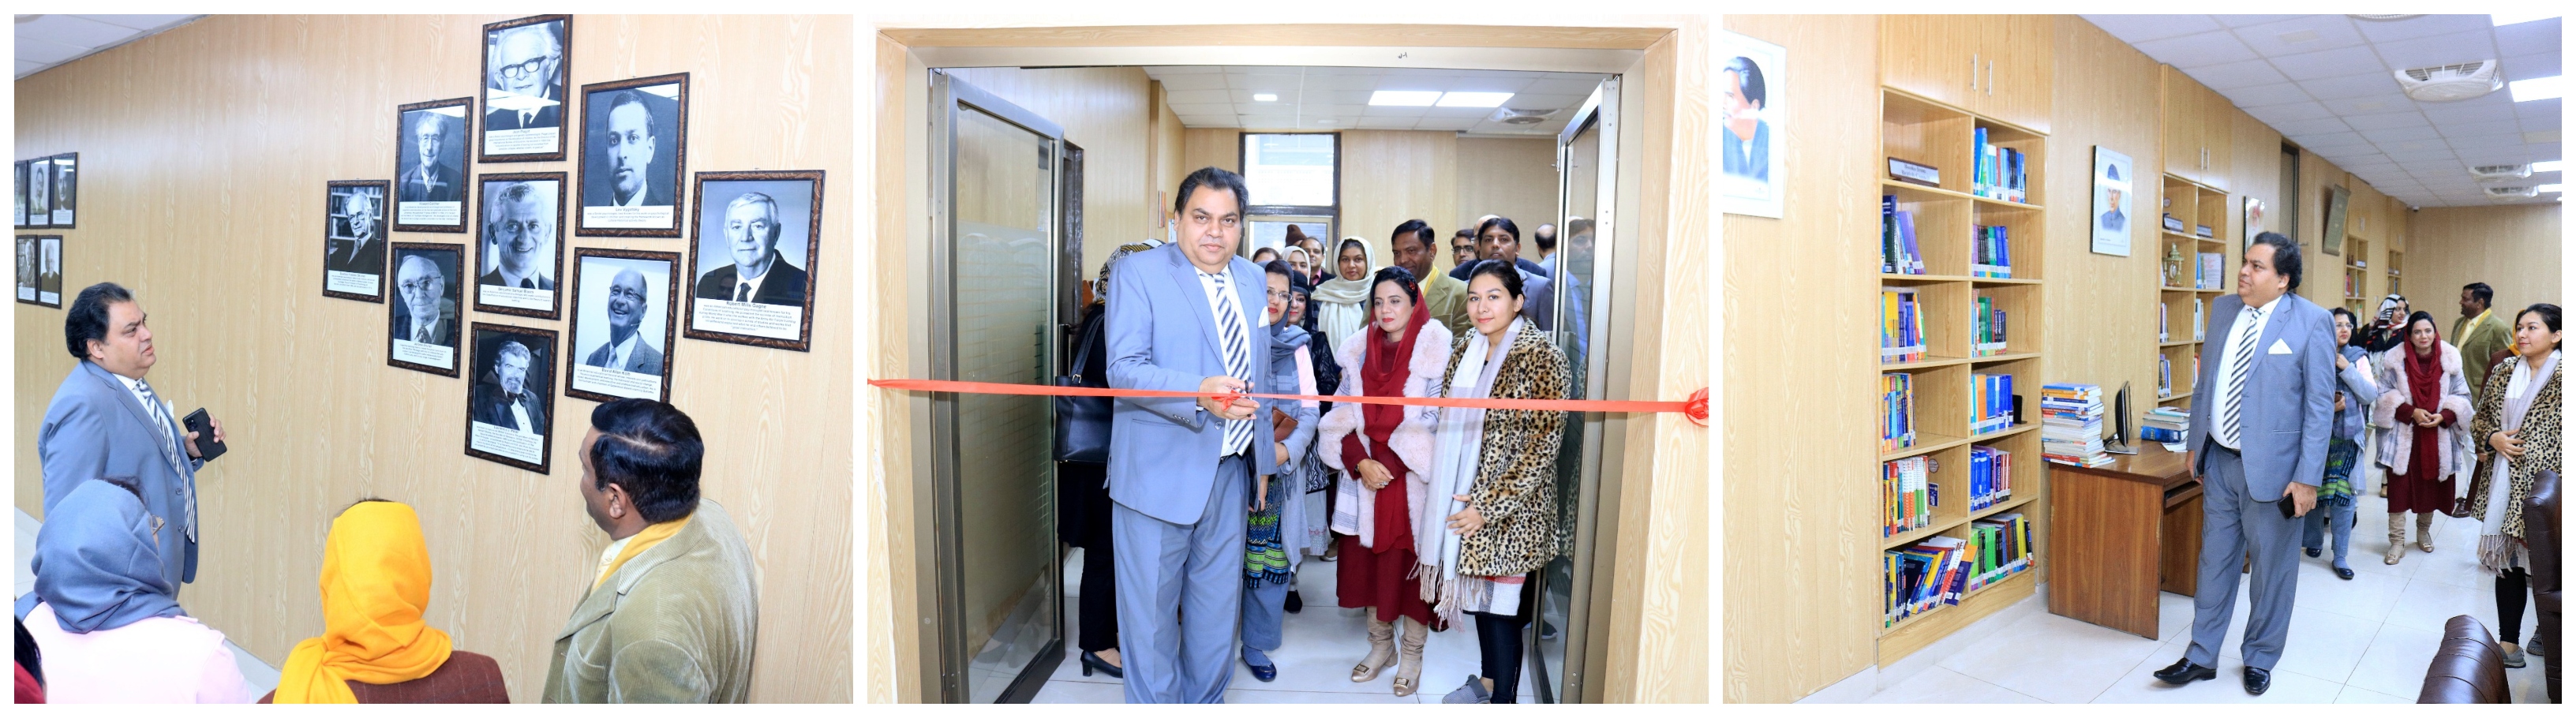 DG QAED inaugurated a Picture Gallery in the main library of  QAED Punjab